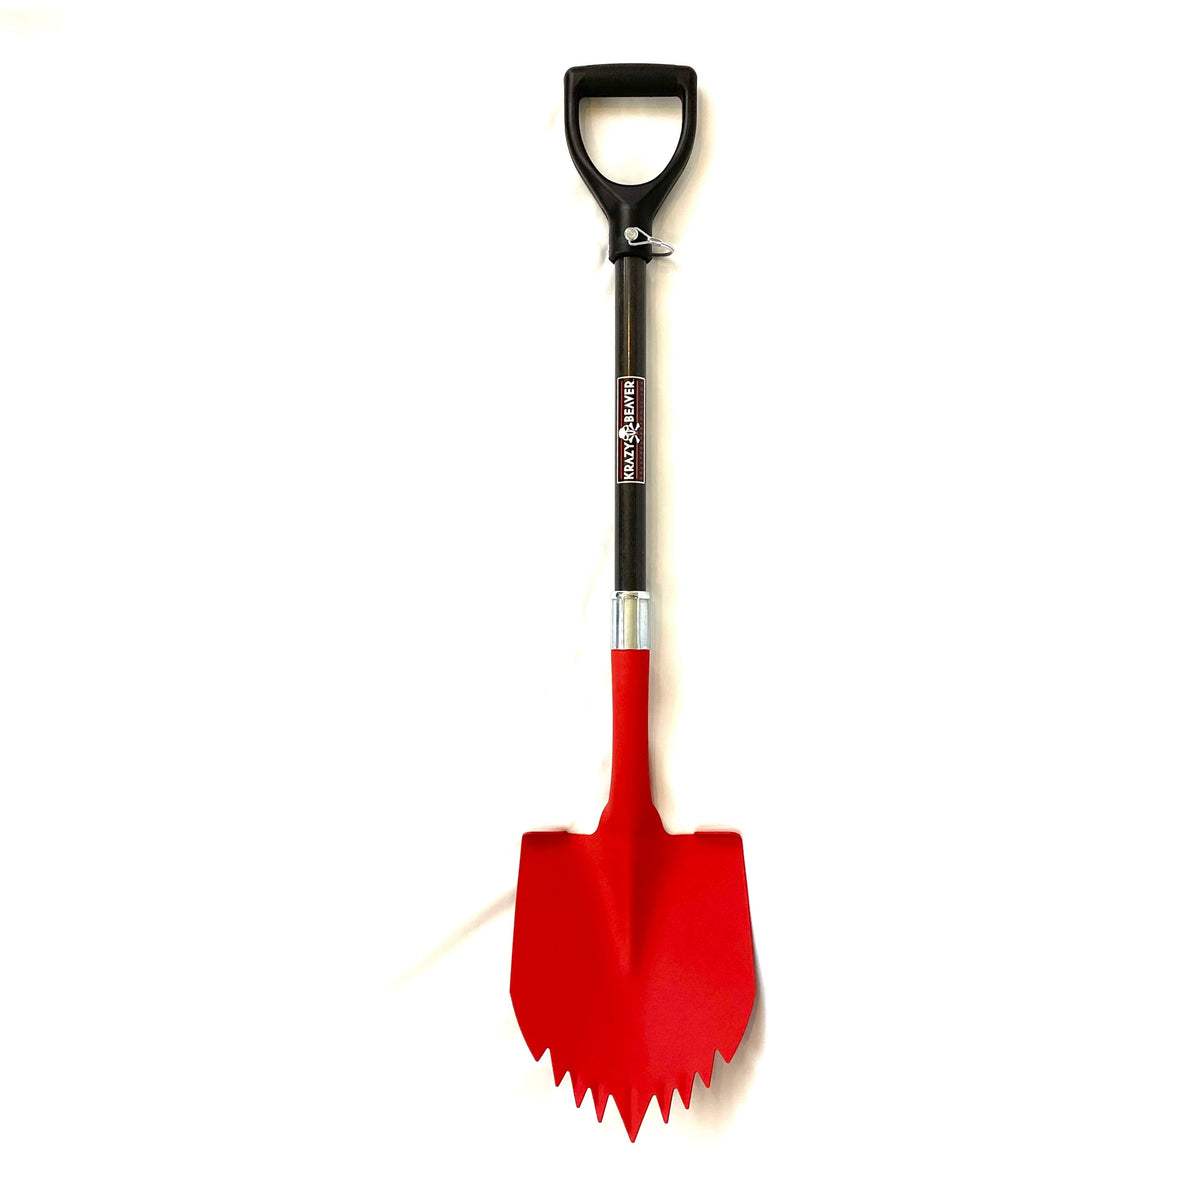 Krazy Beaver Shovel (Textured Red Head / Black Handle 45636)  Recovery Gear, Camping gear, Shovel, Camping Krazy Beaver Tools- Adventure Imports